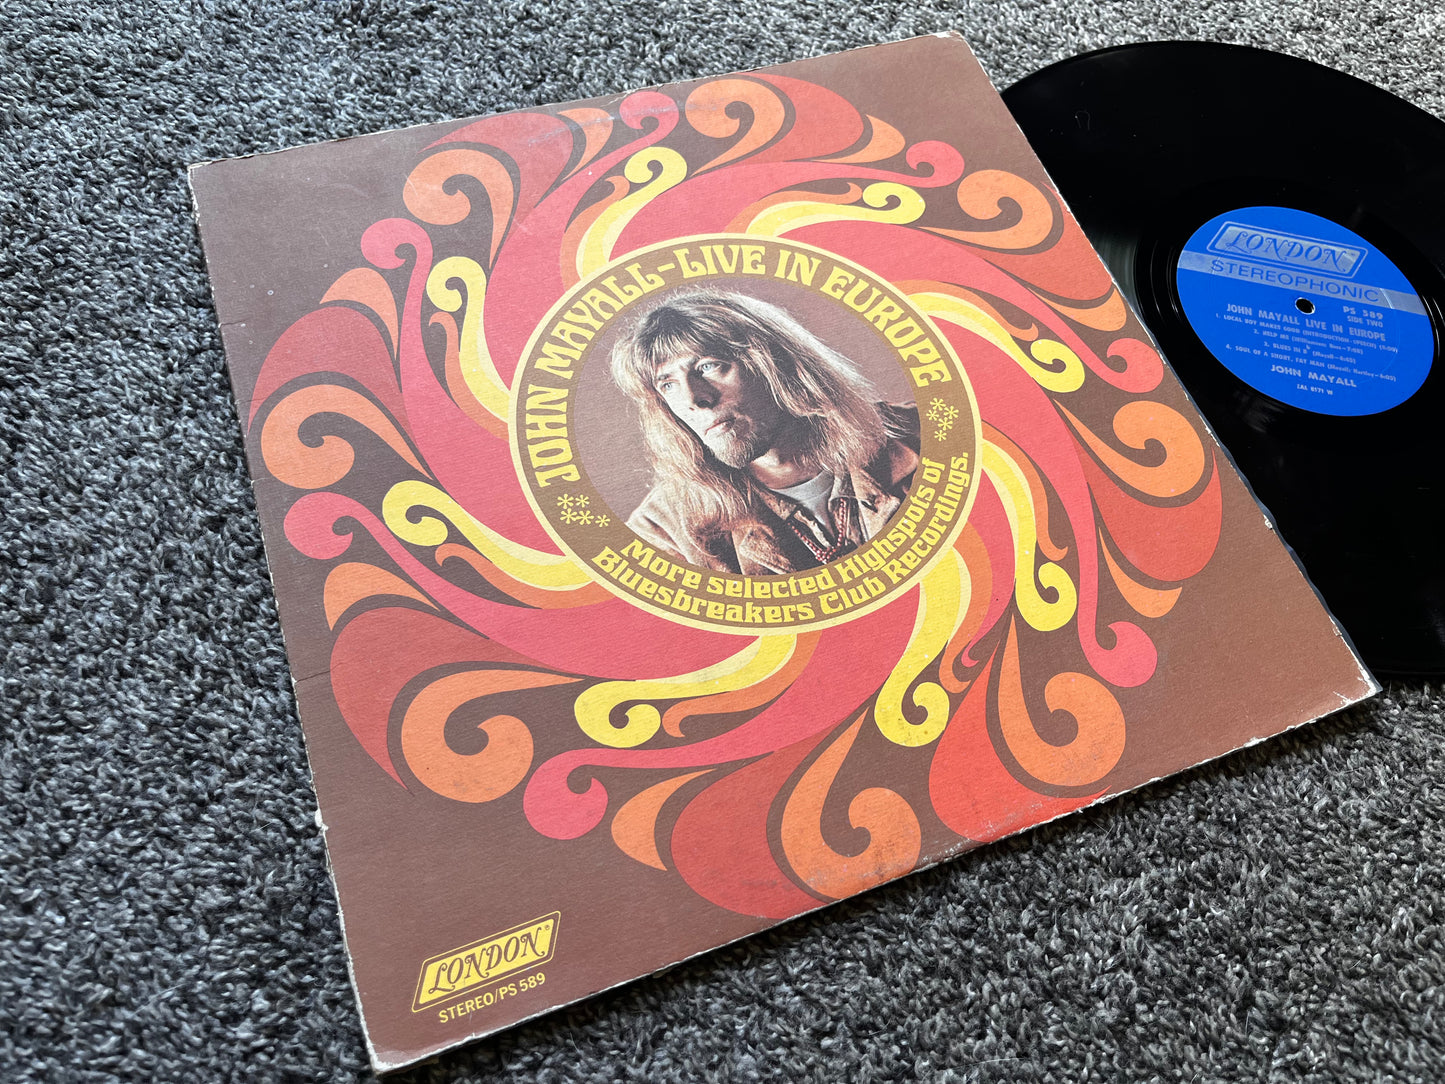 John Mayall - Live In Europe Vinyl London STEREO PS 589 Used VG+